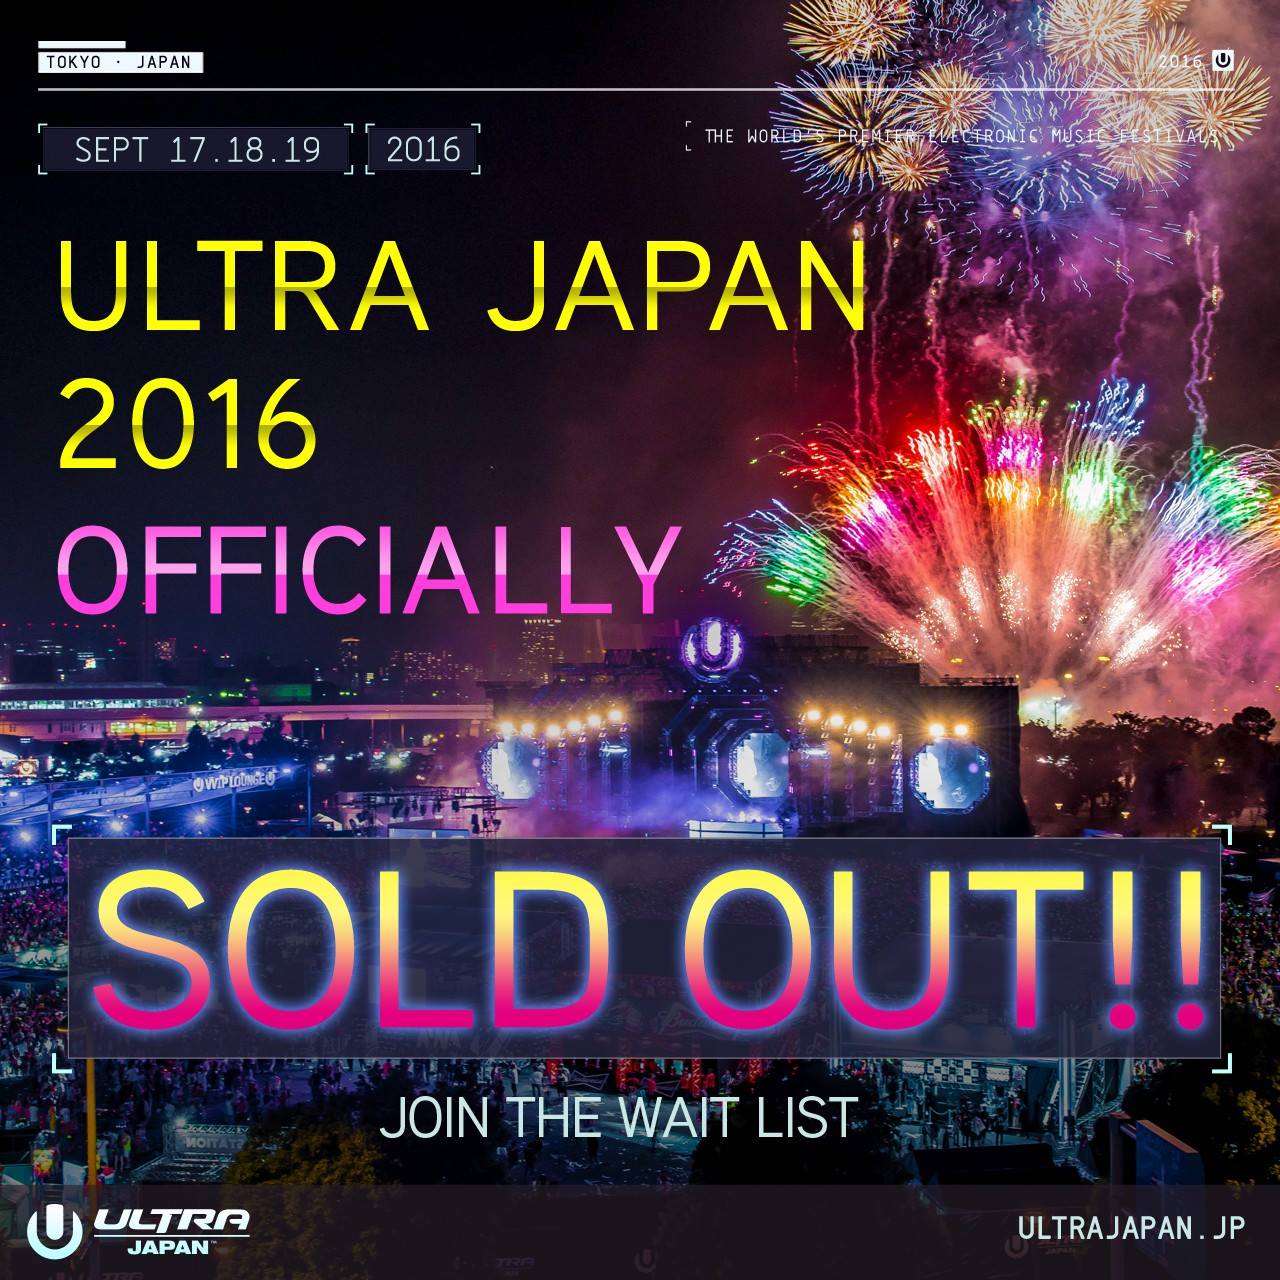 ultra-japan-2016-officially-sold-out